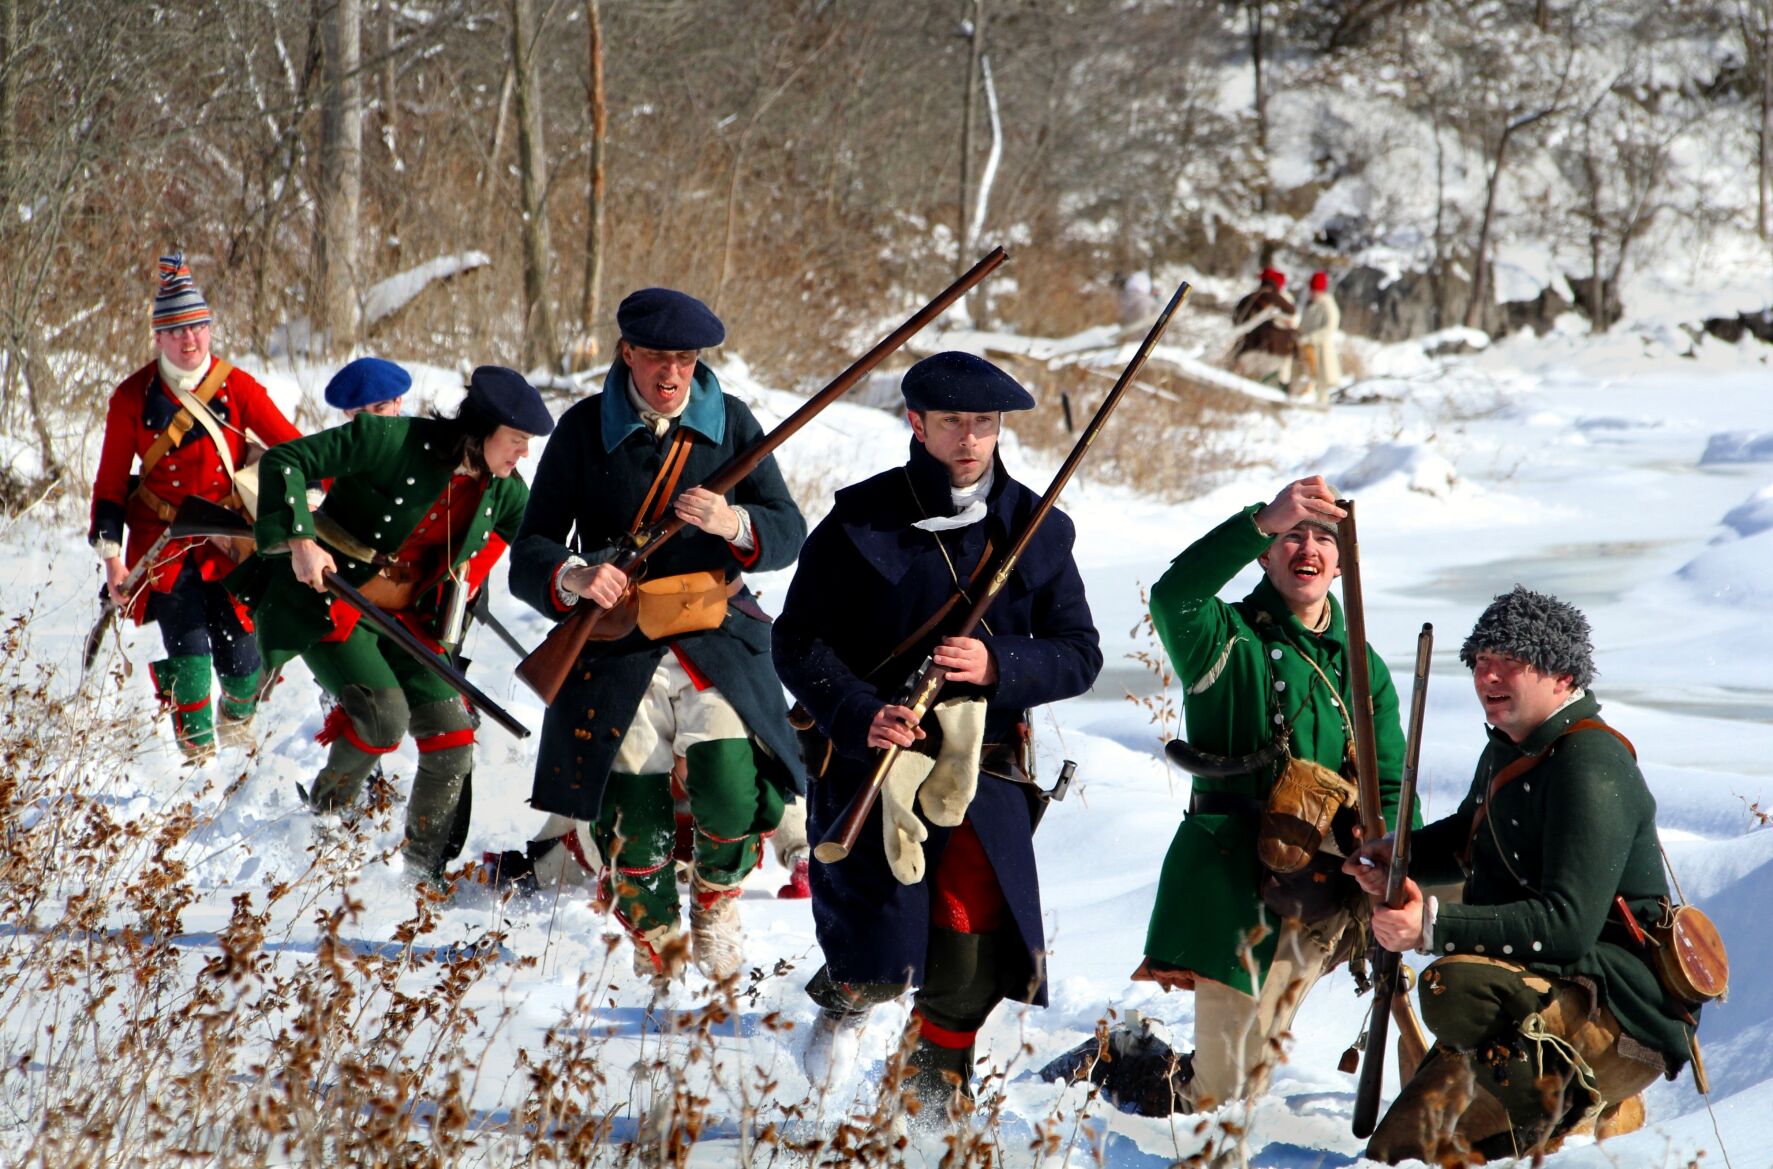 History on snowshoes: Re-enactors display life in 1759 at